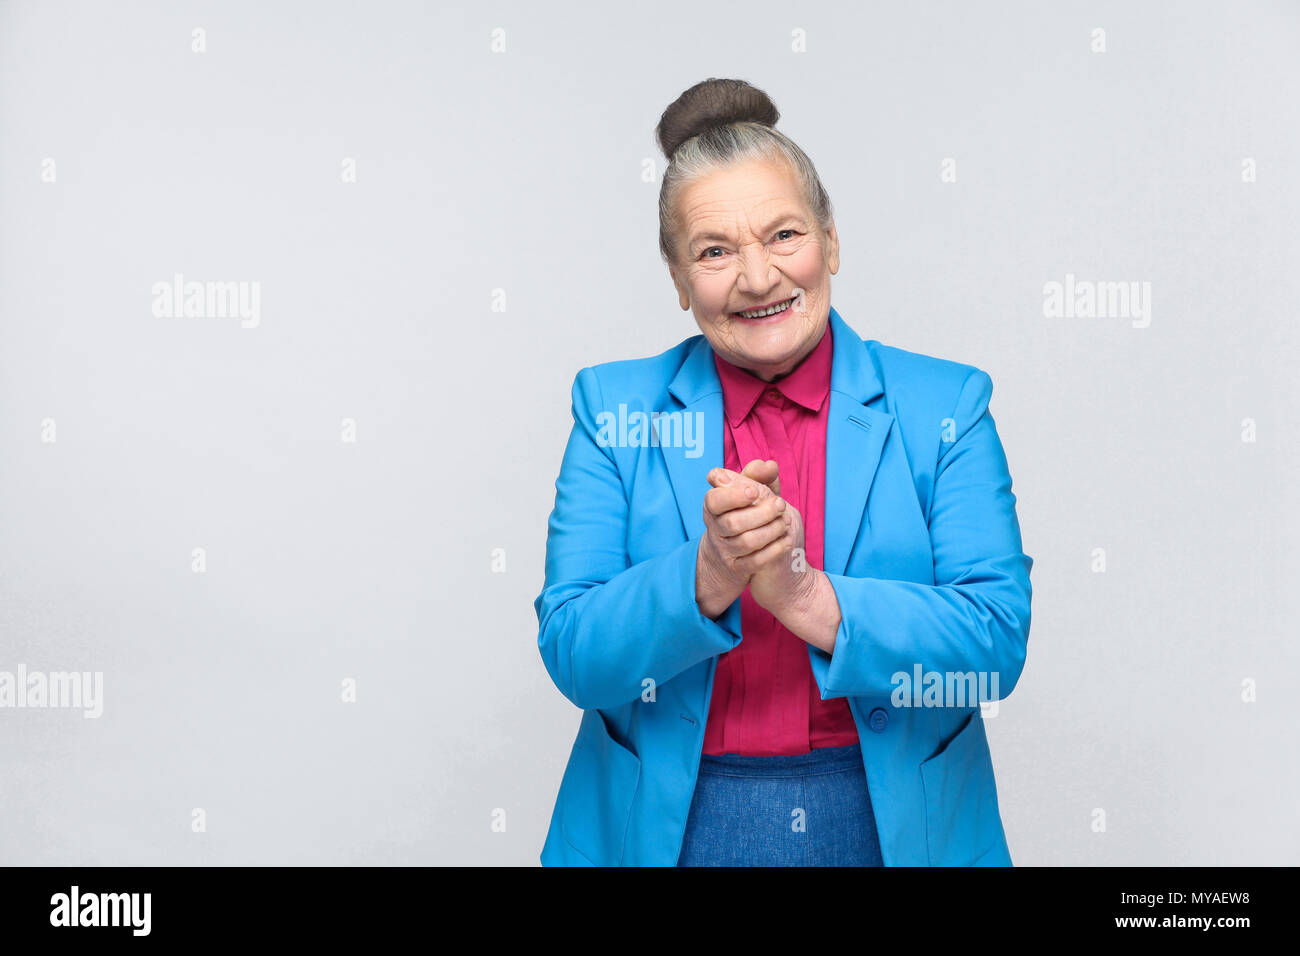 happy aged woman toothy smiling. Emotion and feelings, expressive grandmother with light blue suit and pink shirt standing with collected bun gray hai Stock Photo